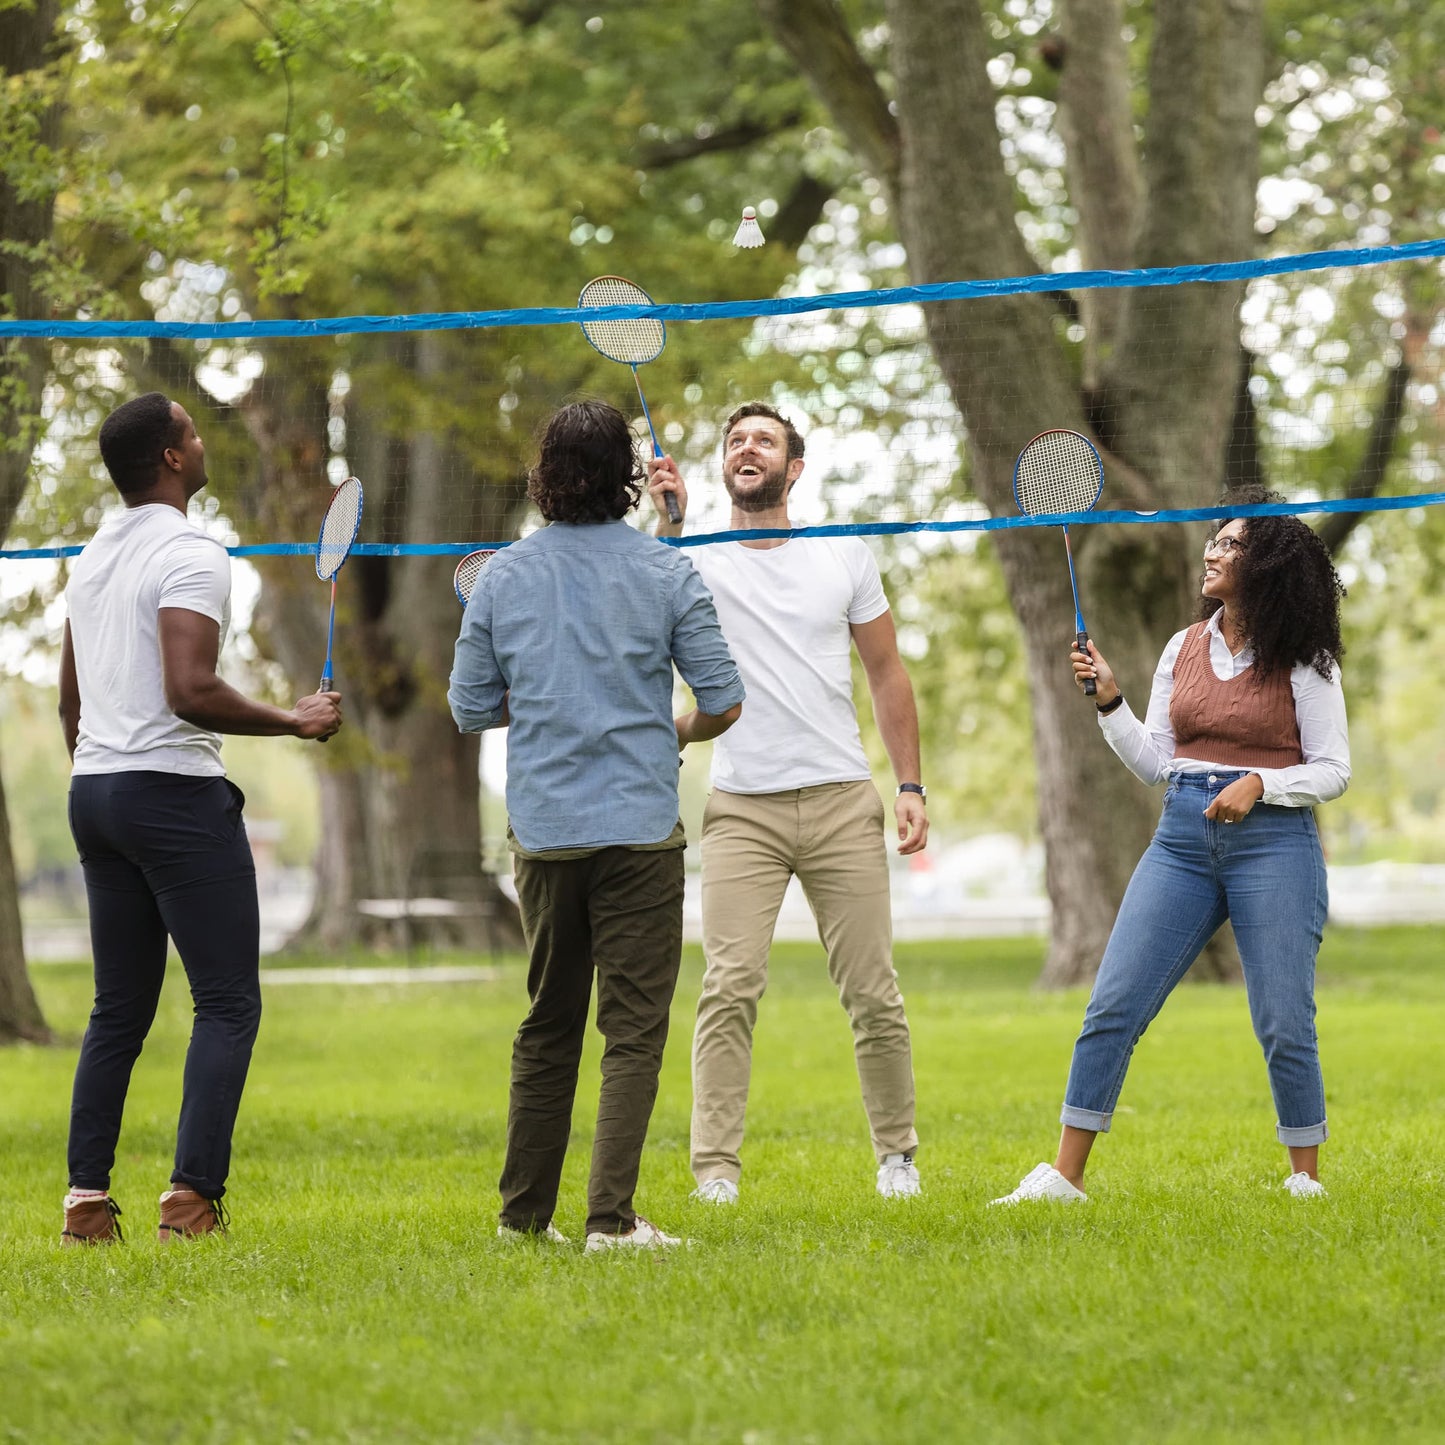 Sportcraft Badminton Volley Ball Set - Lifestyle Image - Group of young adult's playing Badminton in a park